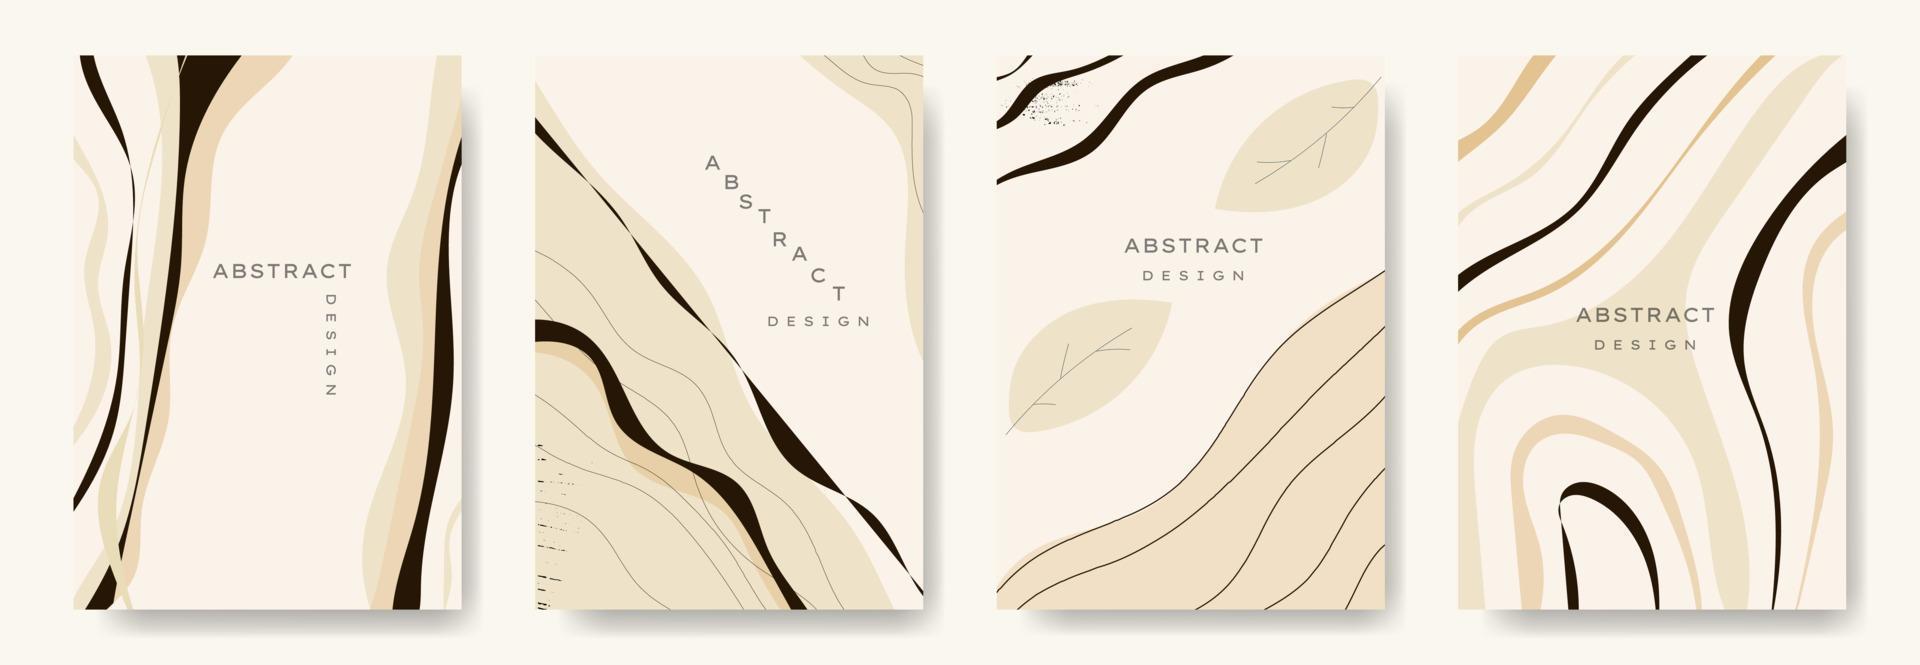 Modern abstract vector backgrounds.minimal trendy style. various shapes set up design templates good for background  card greeting wallpaper brochure flier invitation and other. vector illustration